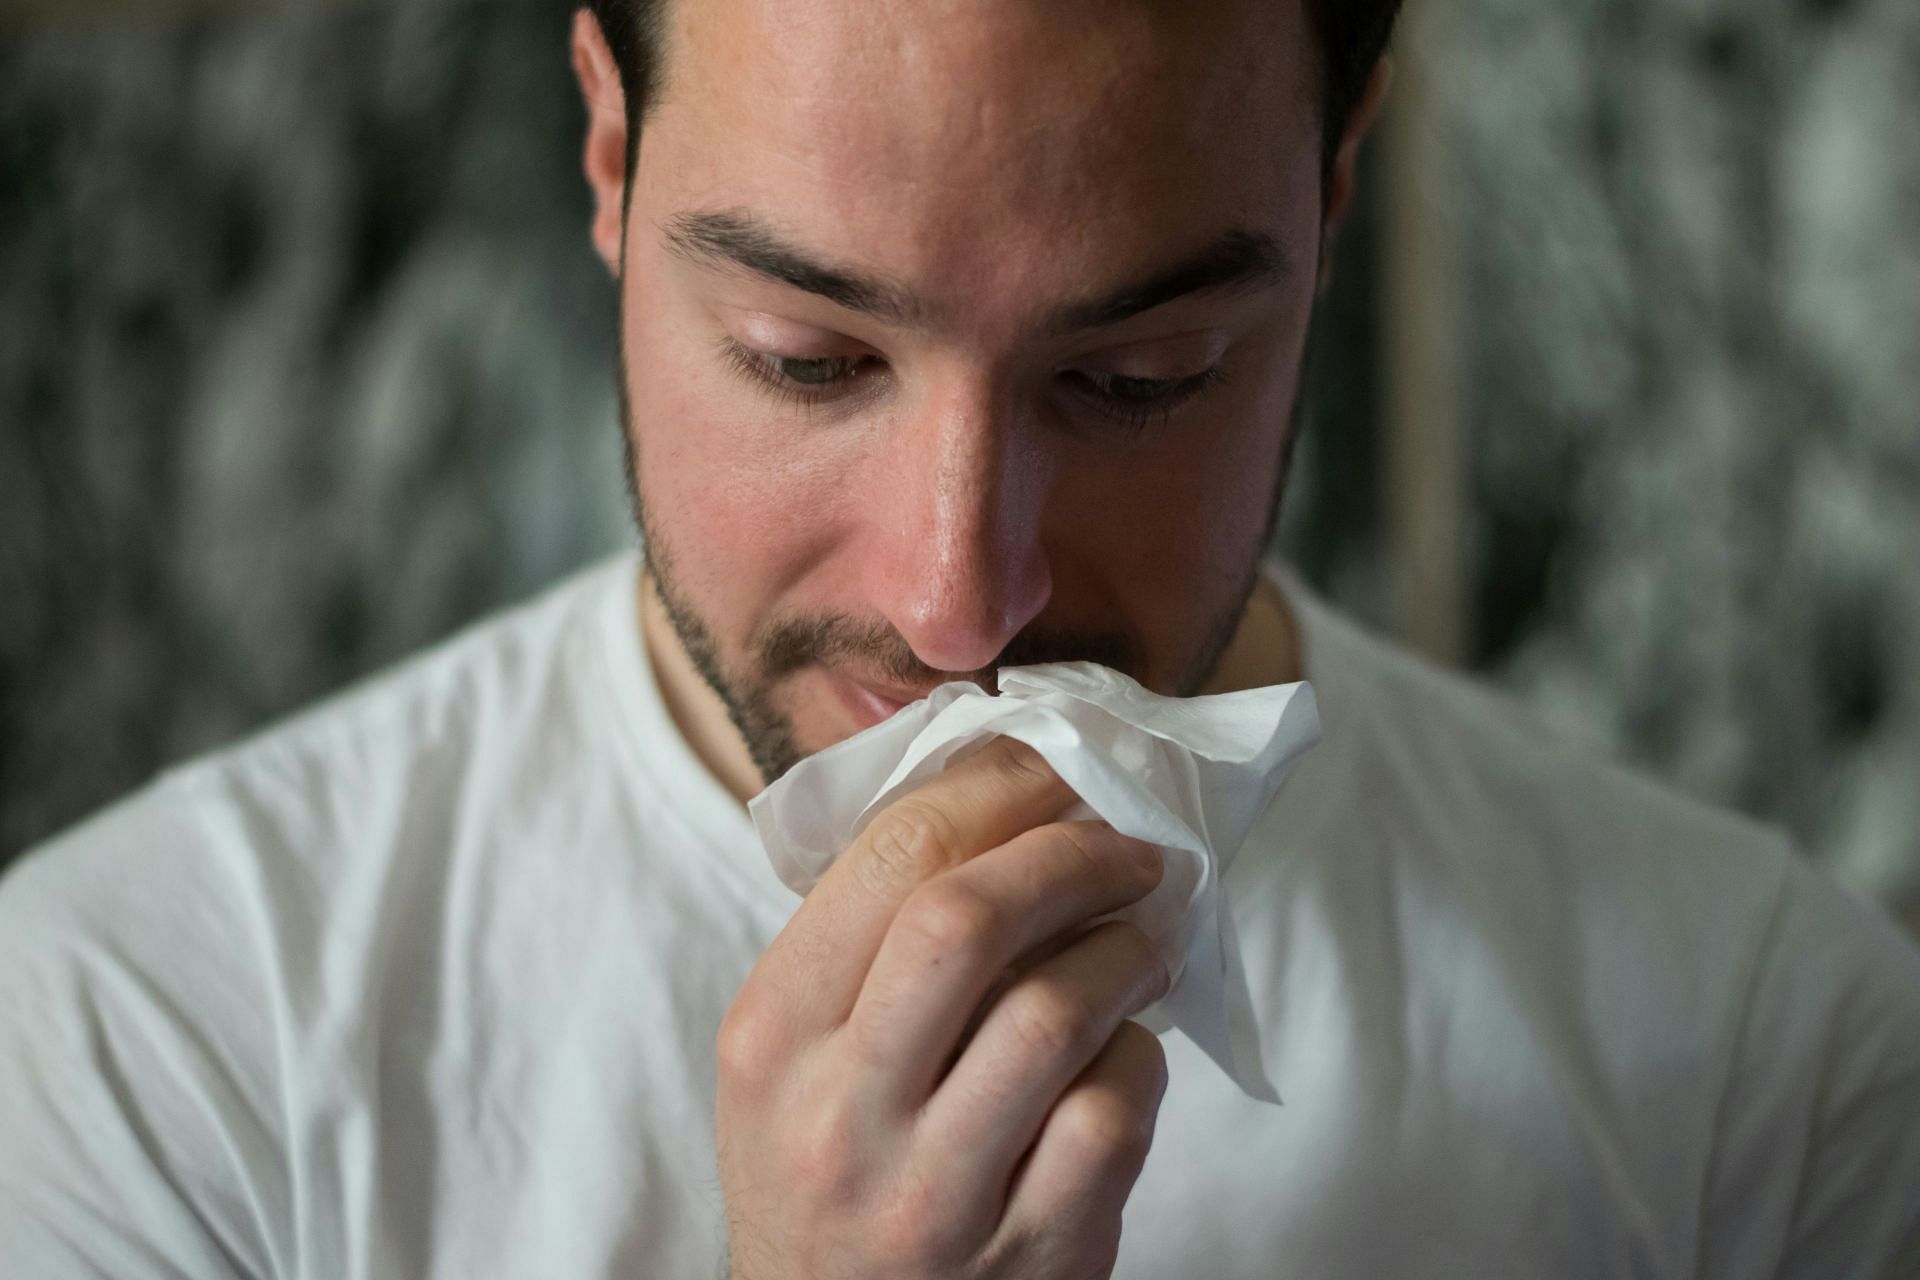 This cancer type can cause severe coughing. (Image by Brittany Colette/Unsplash)